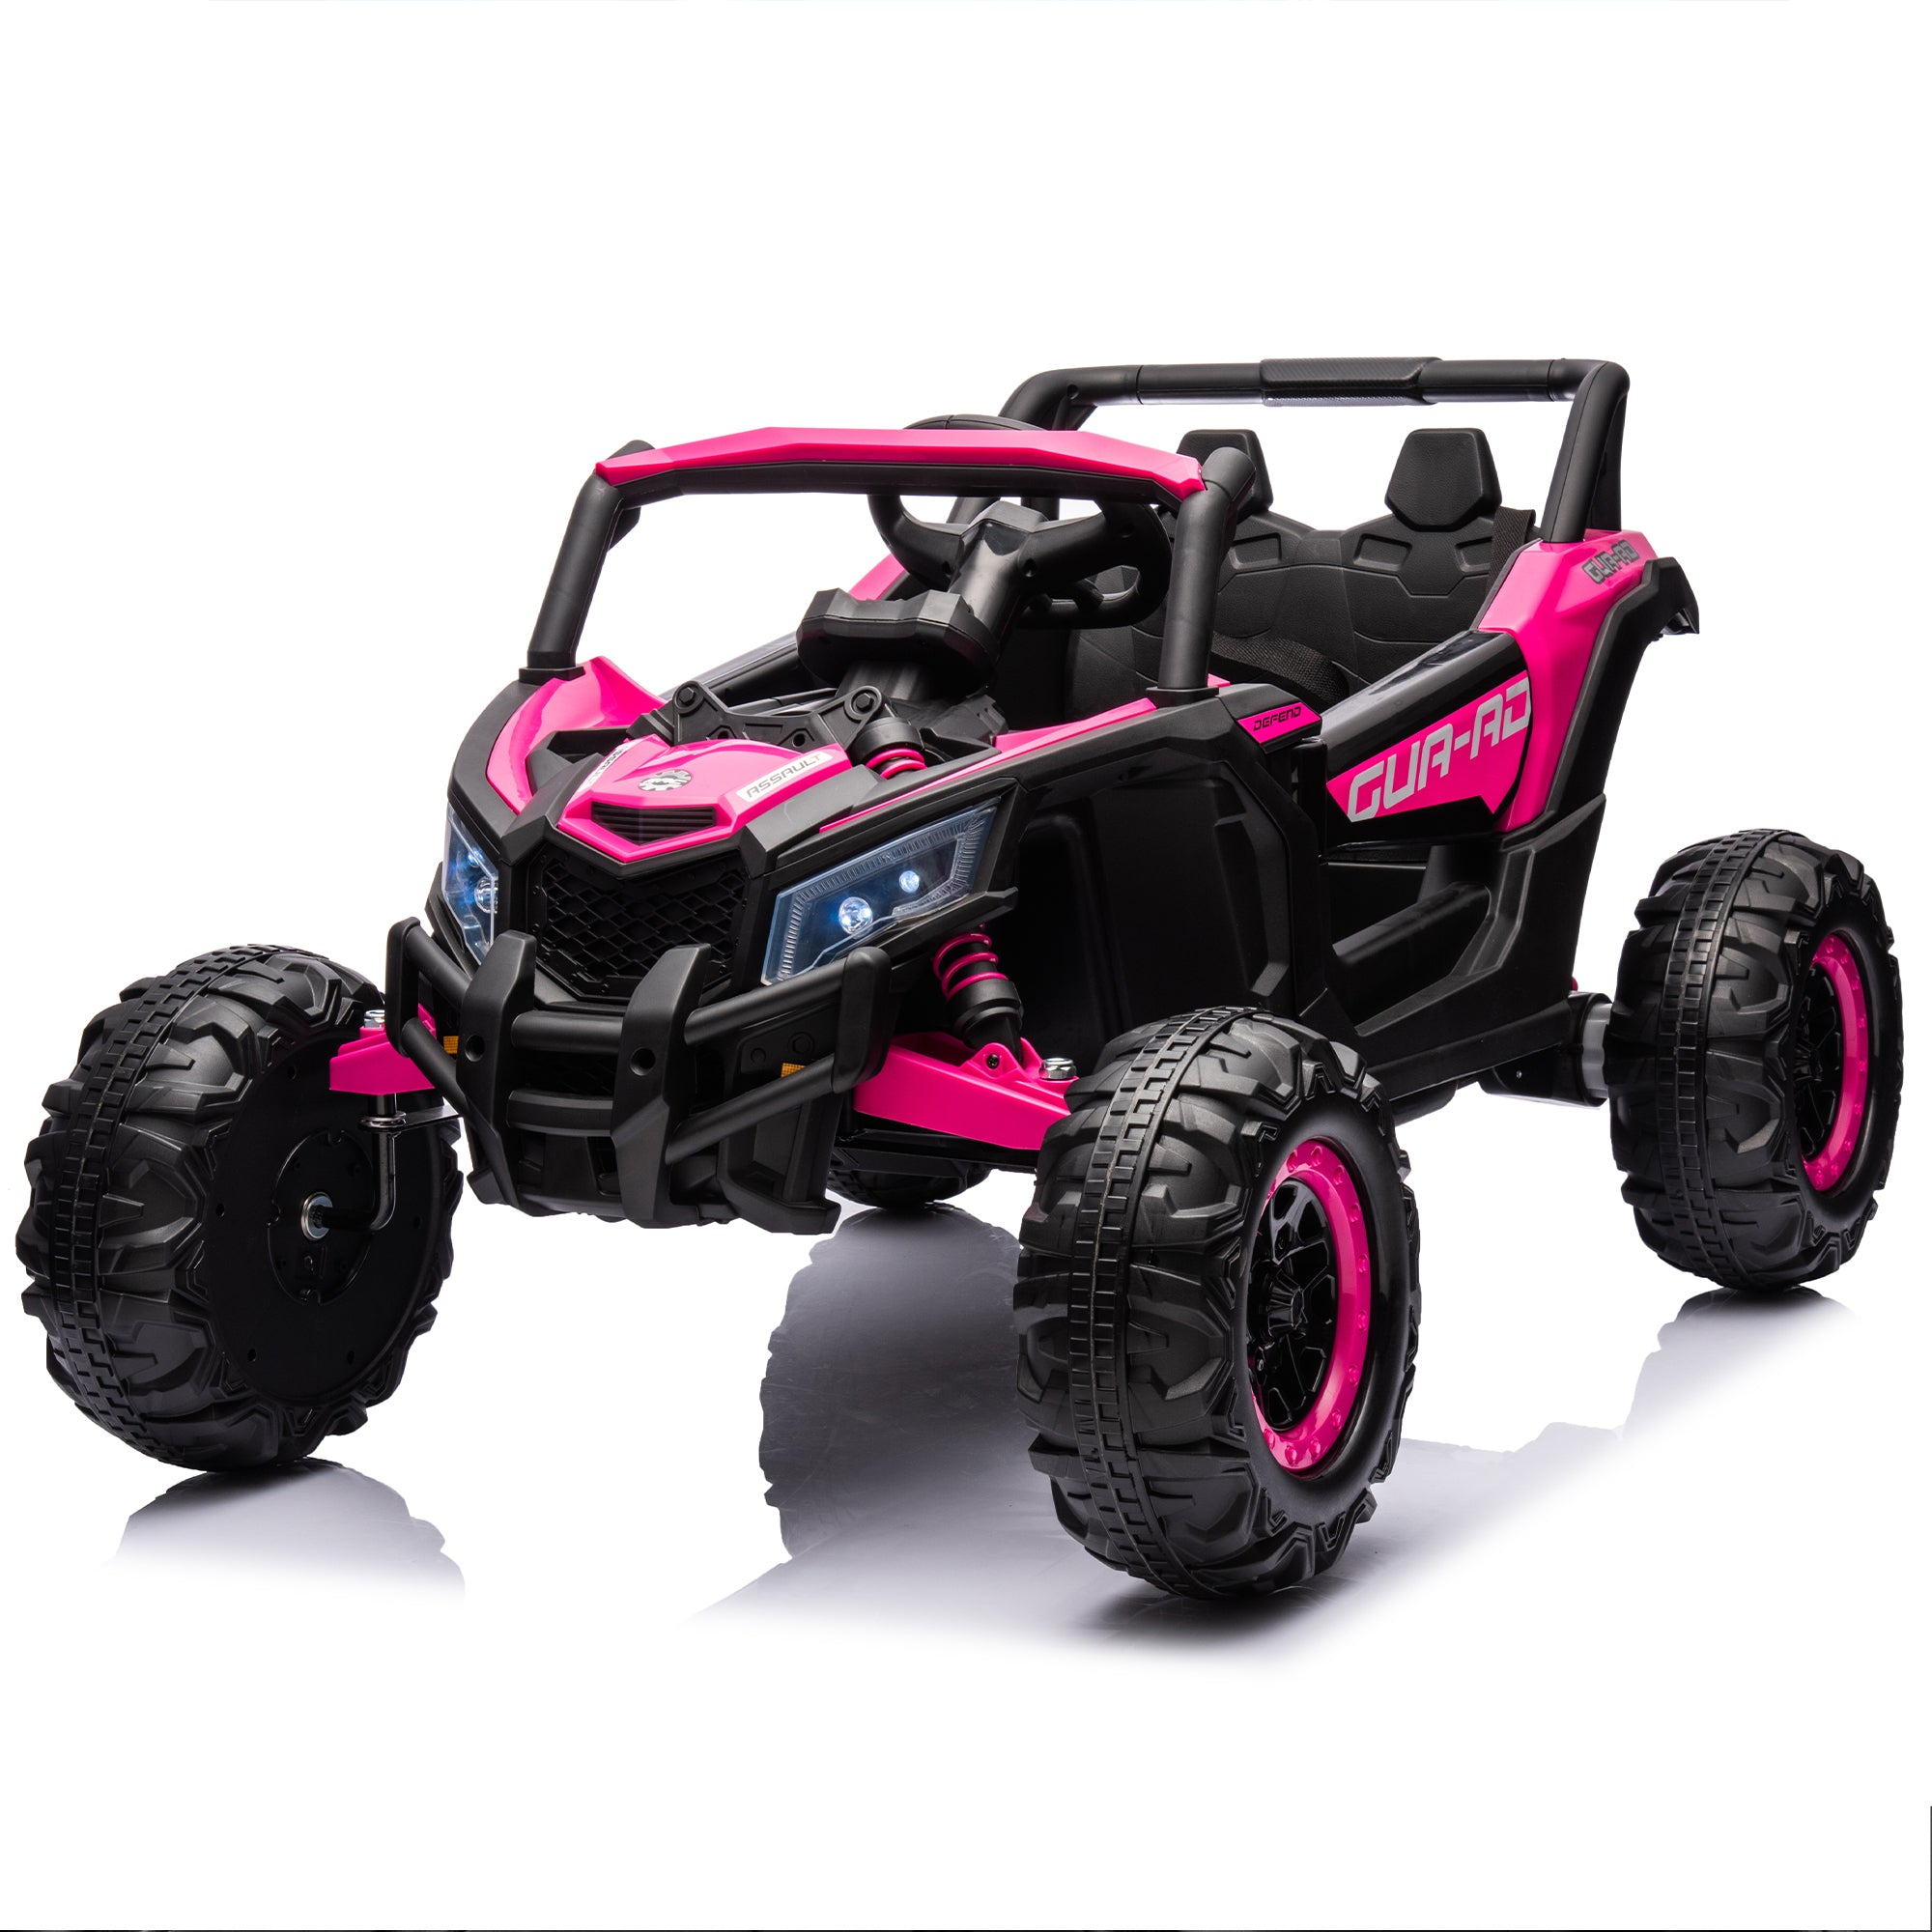 🆓🚛 12V Ride On Car With Remote Control, UTV Ride On for Kid, 3-Point Safety Harness, Music Player (USB Port/Volume Knob/Battery Indicator), LED Lights, High-Low Speed Switch - Off-Road Adventure for Kids